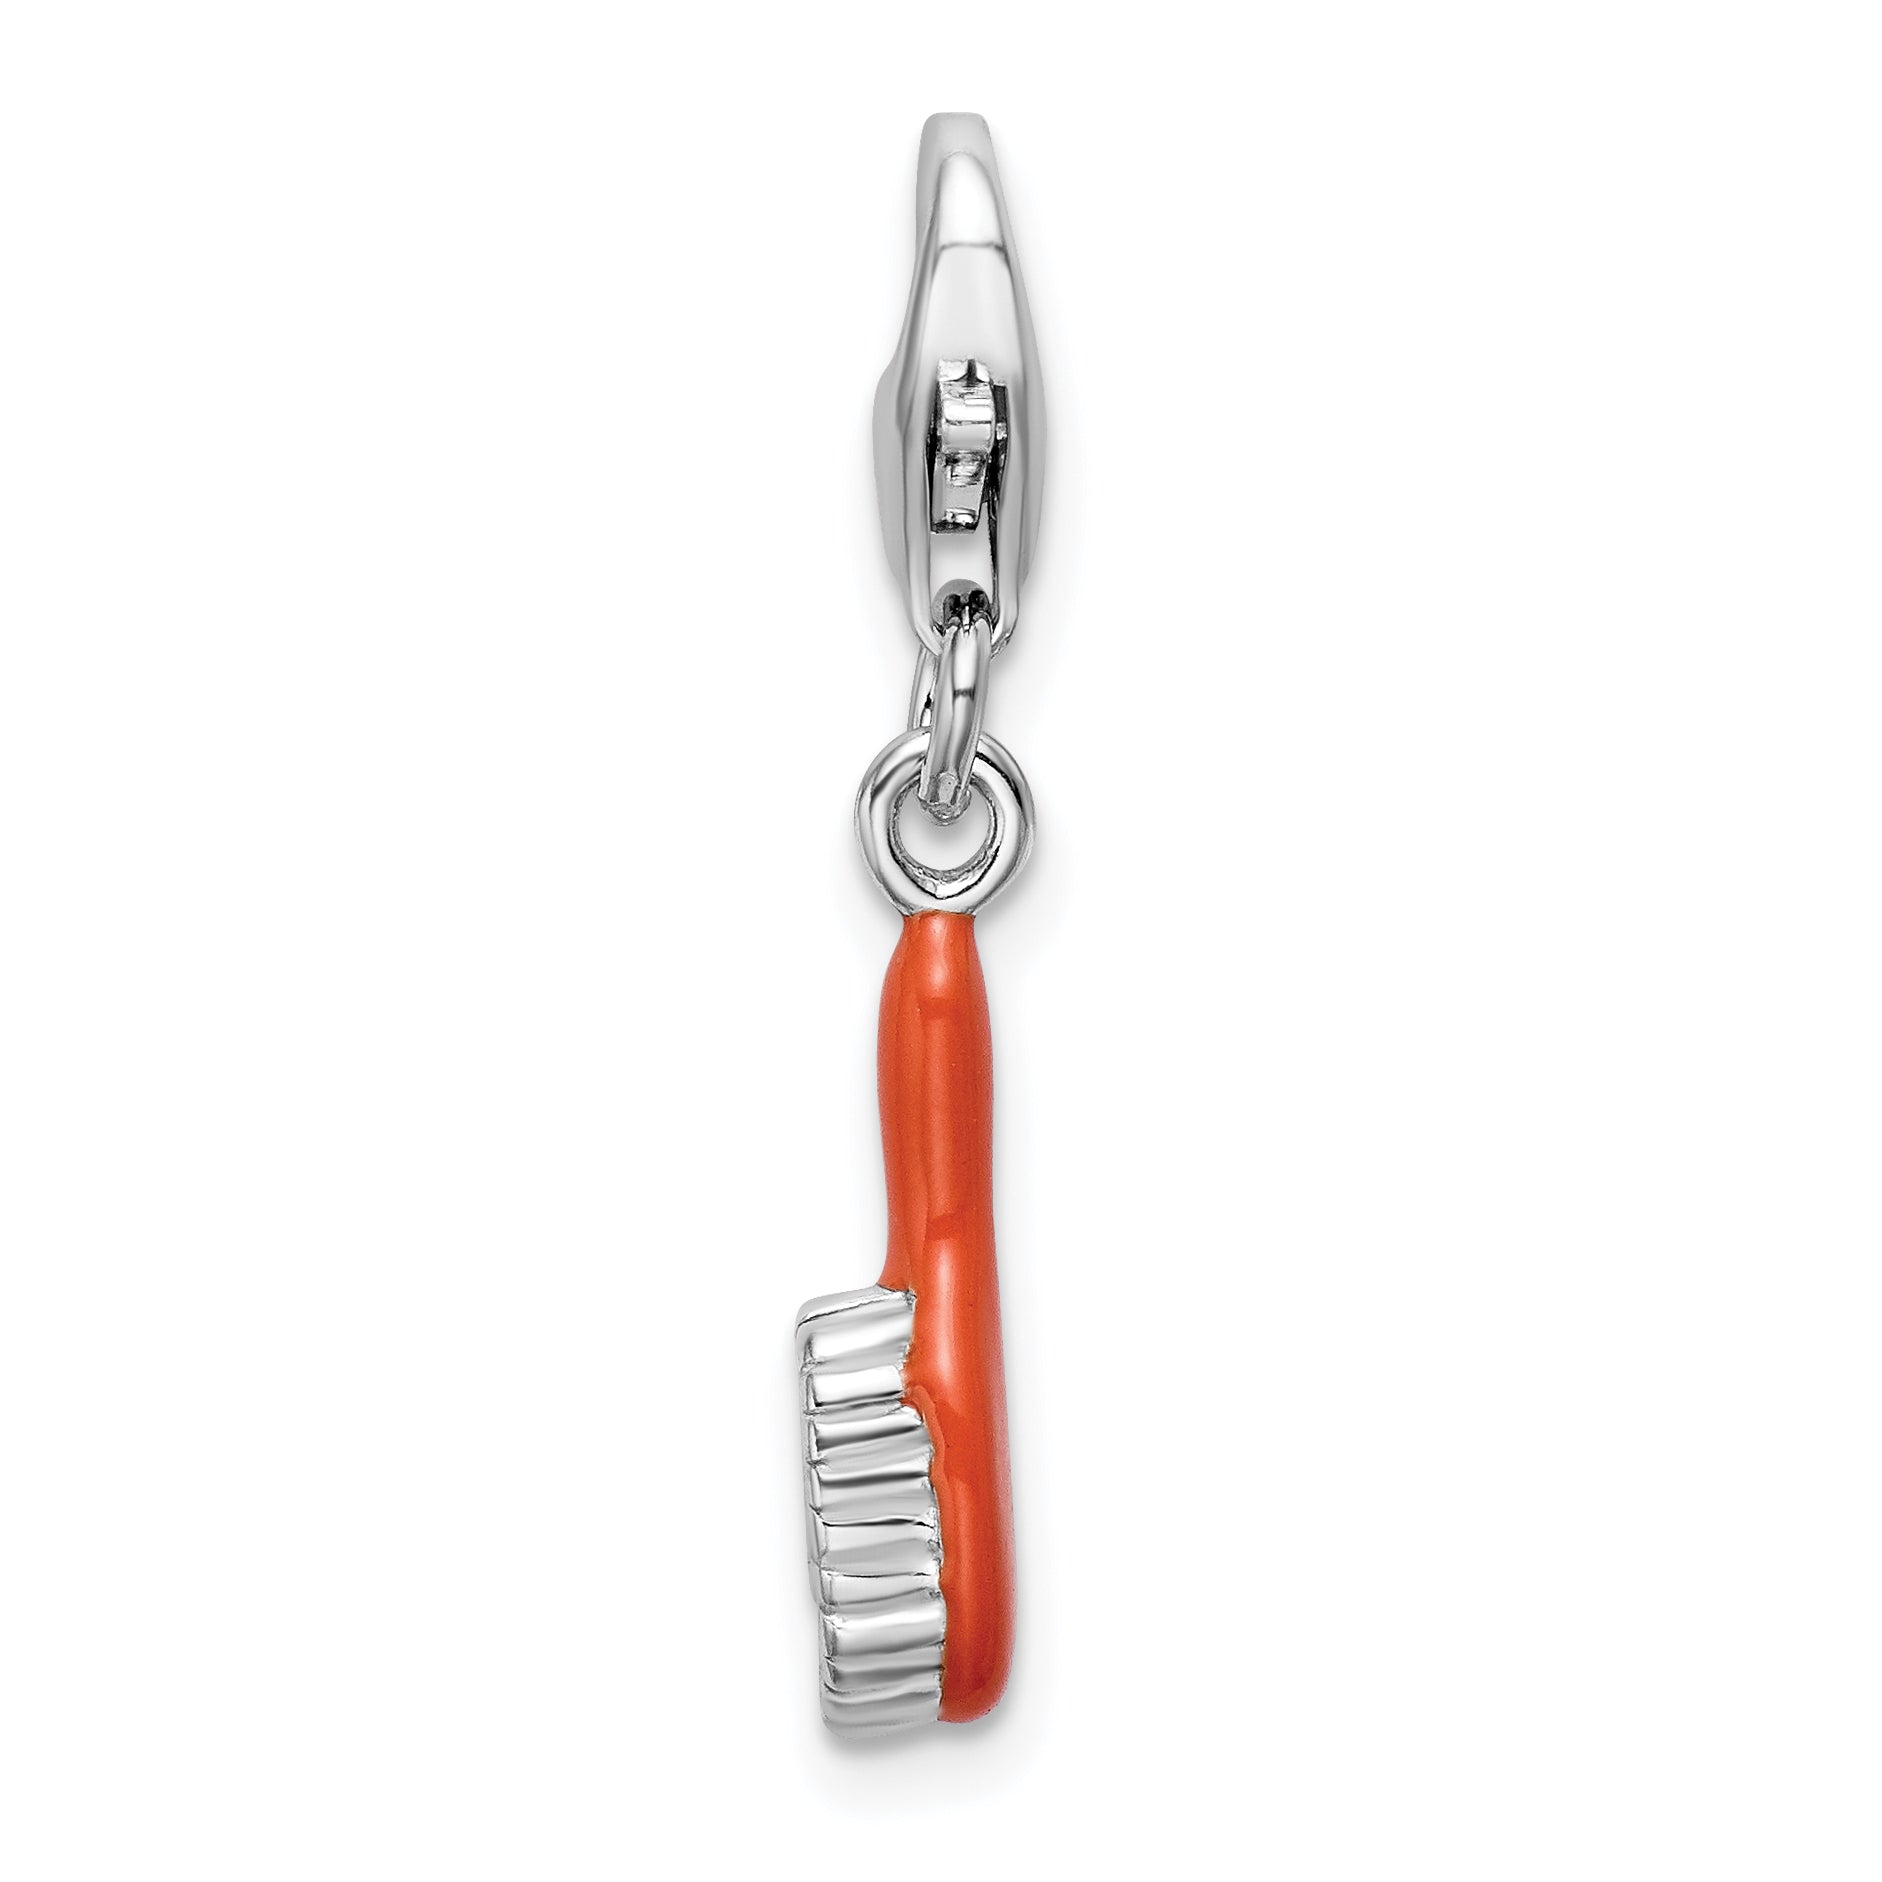 Amore La Vita Sterling Silver Rhodium-plated Polished 3-D Orange Enameled Hair Brush Charm with Fancy Lobster Clasp